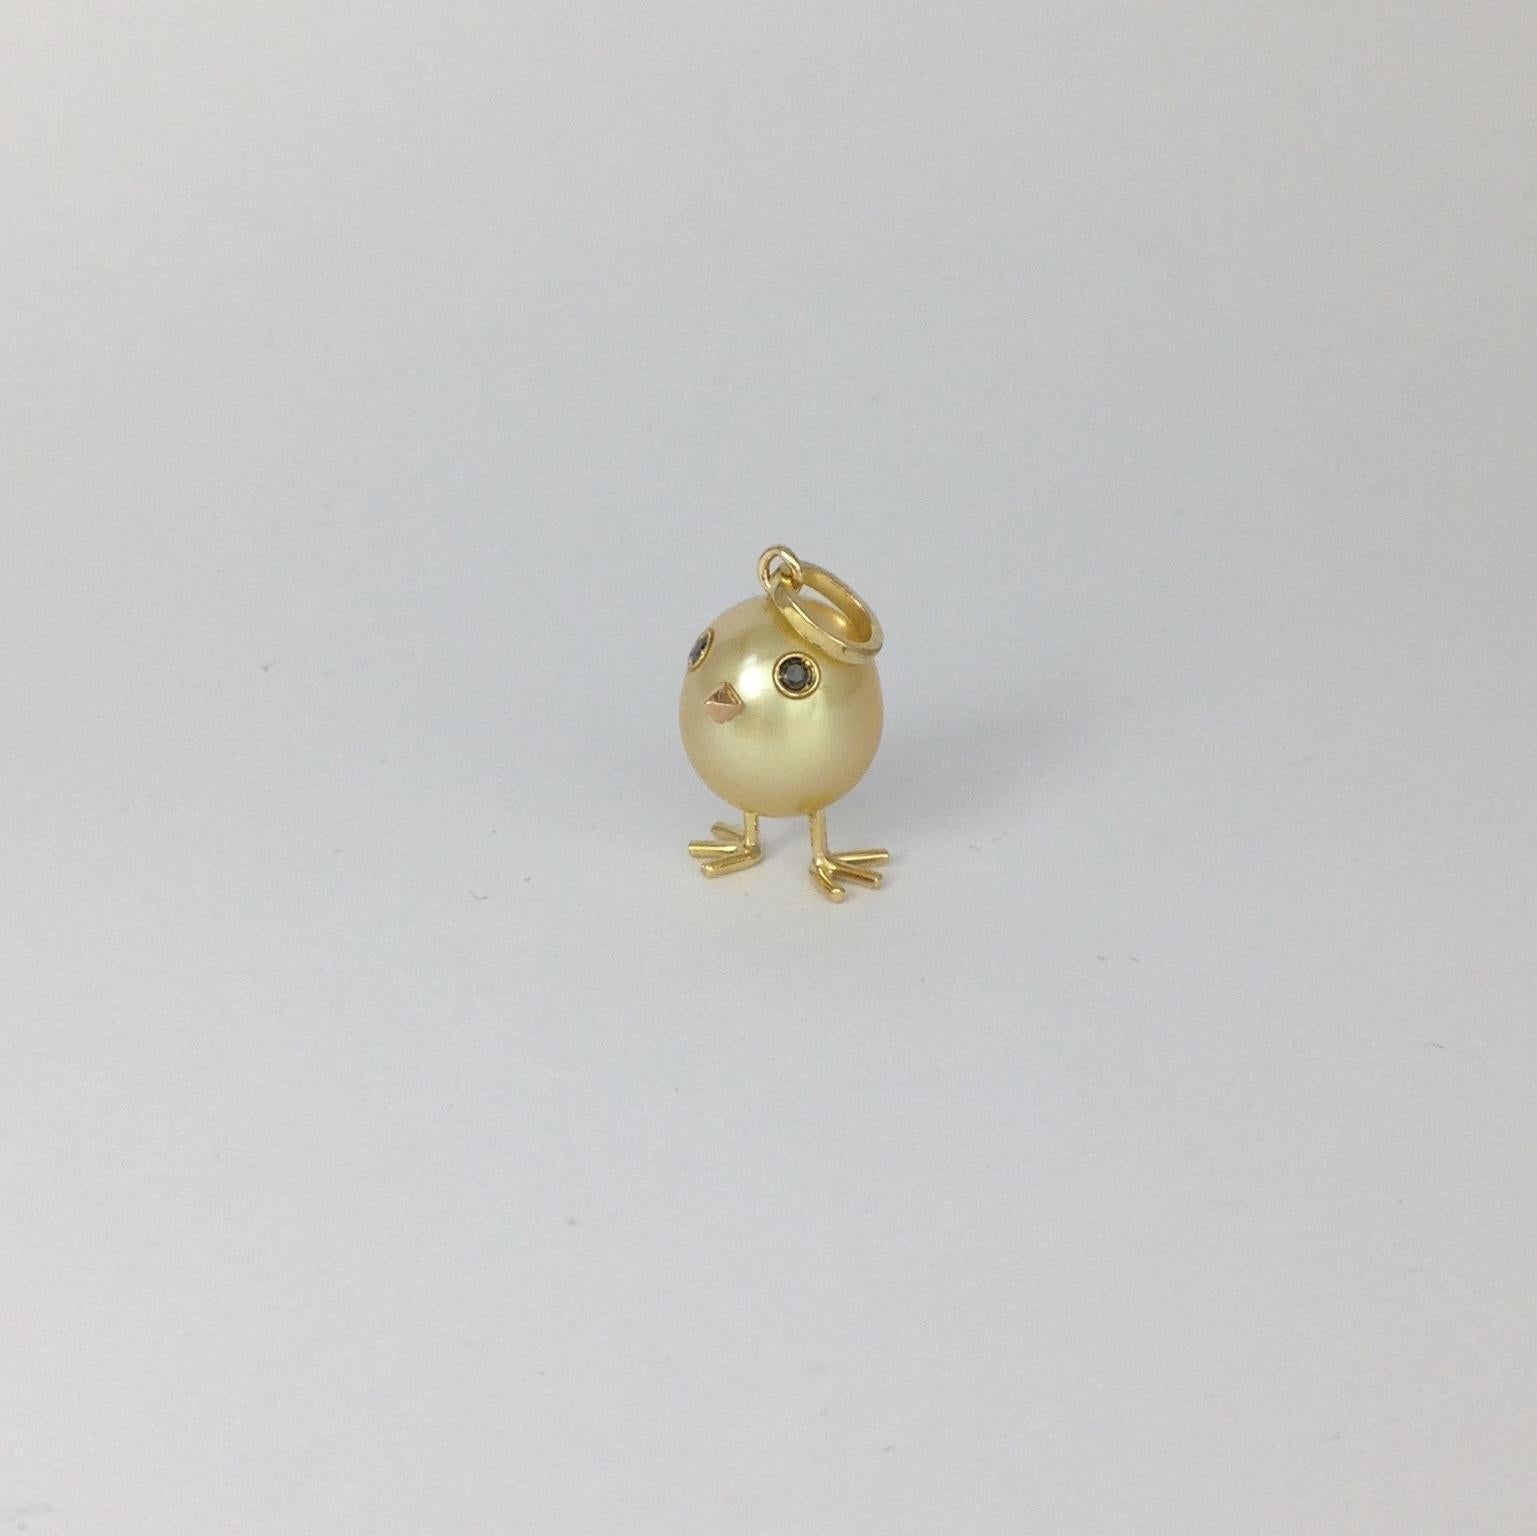 A spherical rare Australian pearl has been carefully crafted to make a chick. He has two legs, two eyes encrusted with two black diamonds. His beak in red gold. 
The gold is yellow.
The caliber is ct 0.03.
The height of the pendant including the